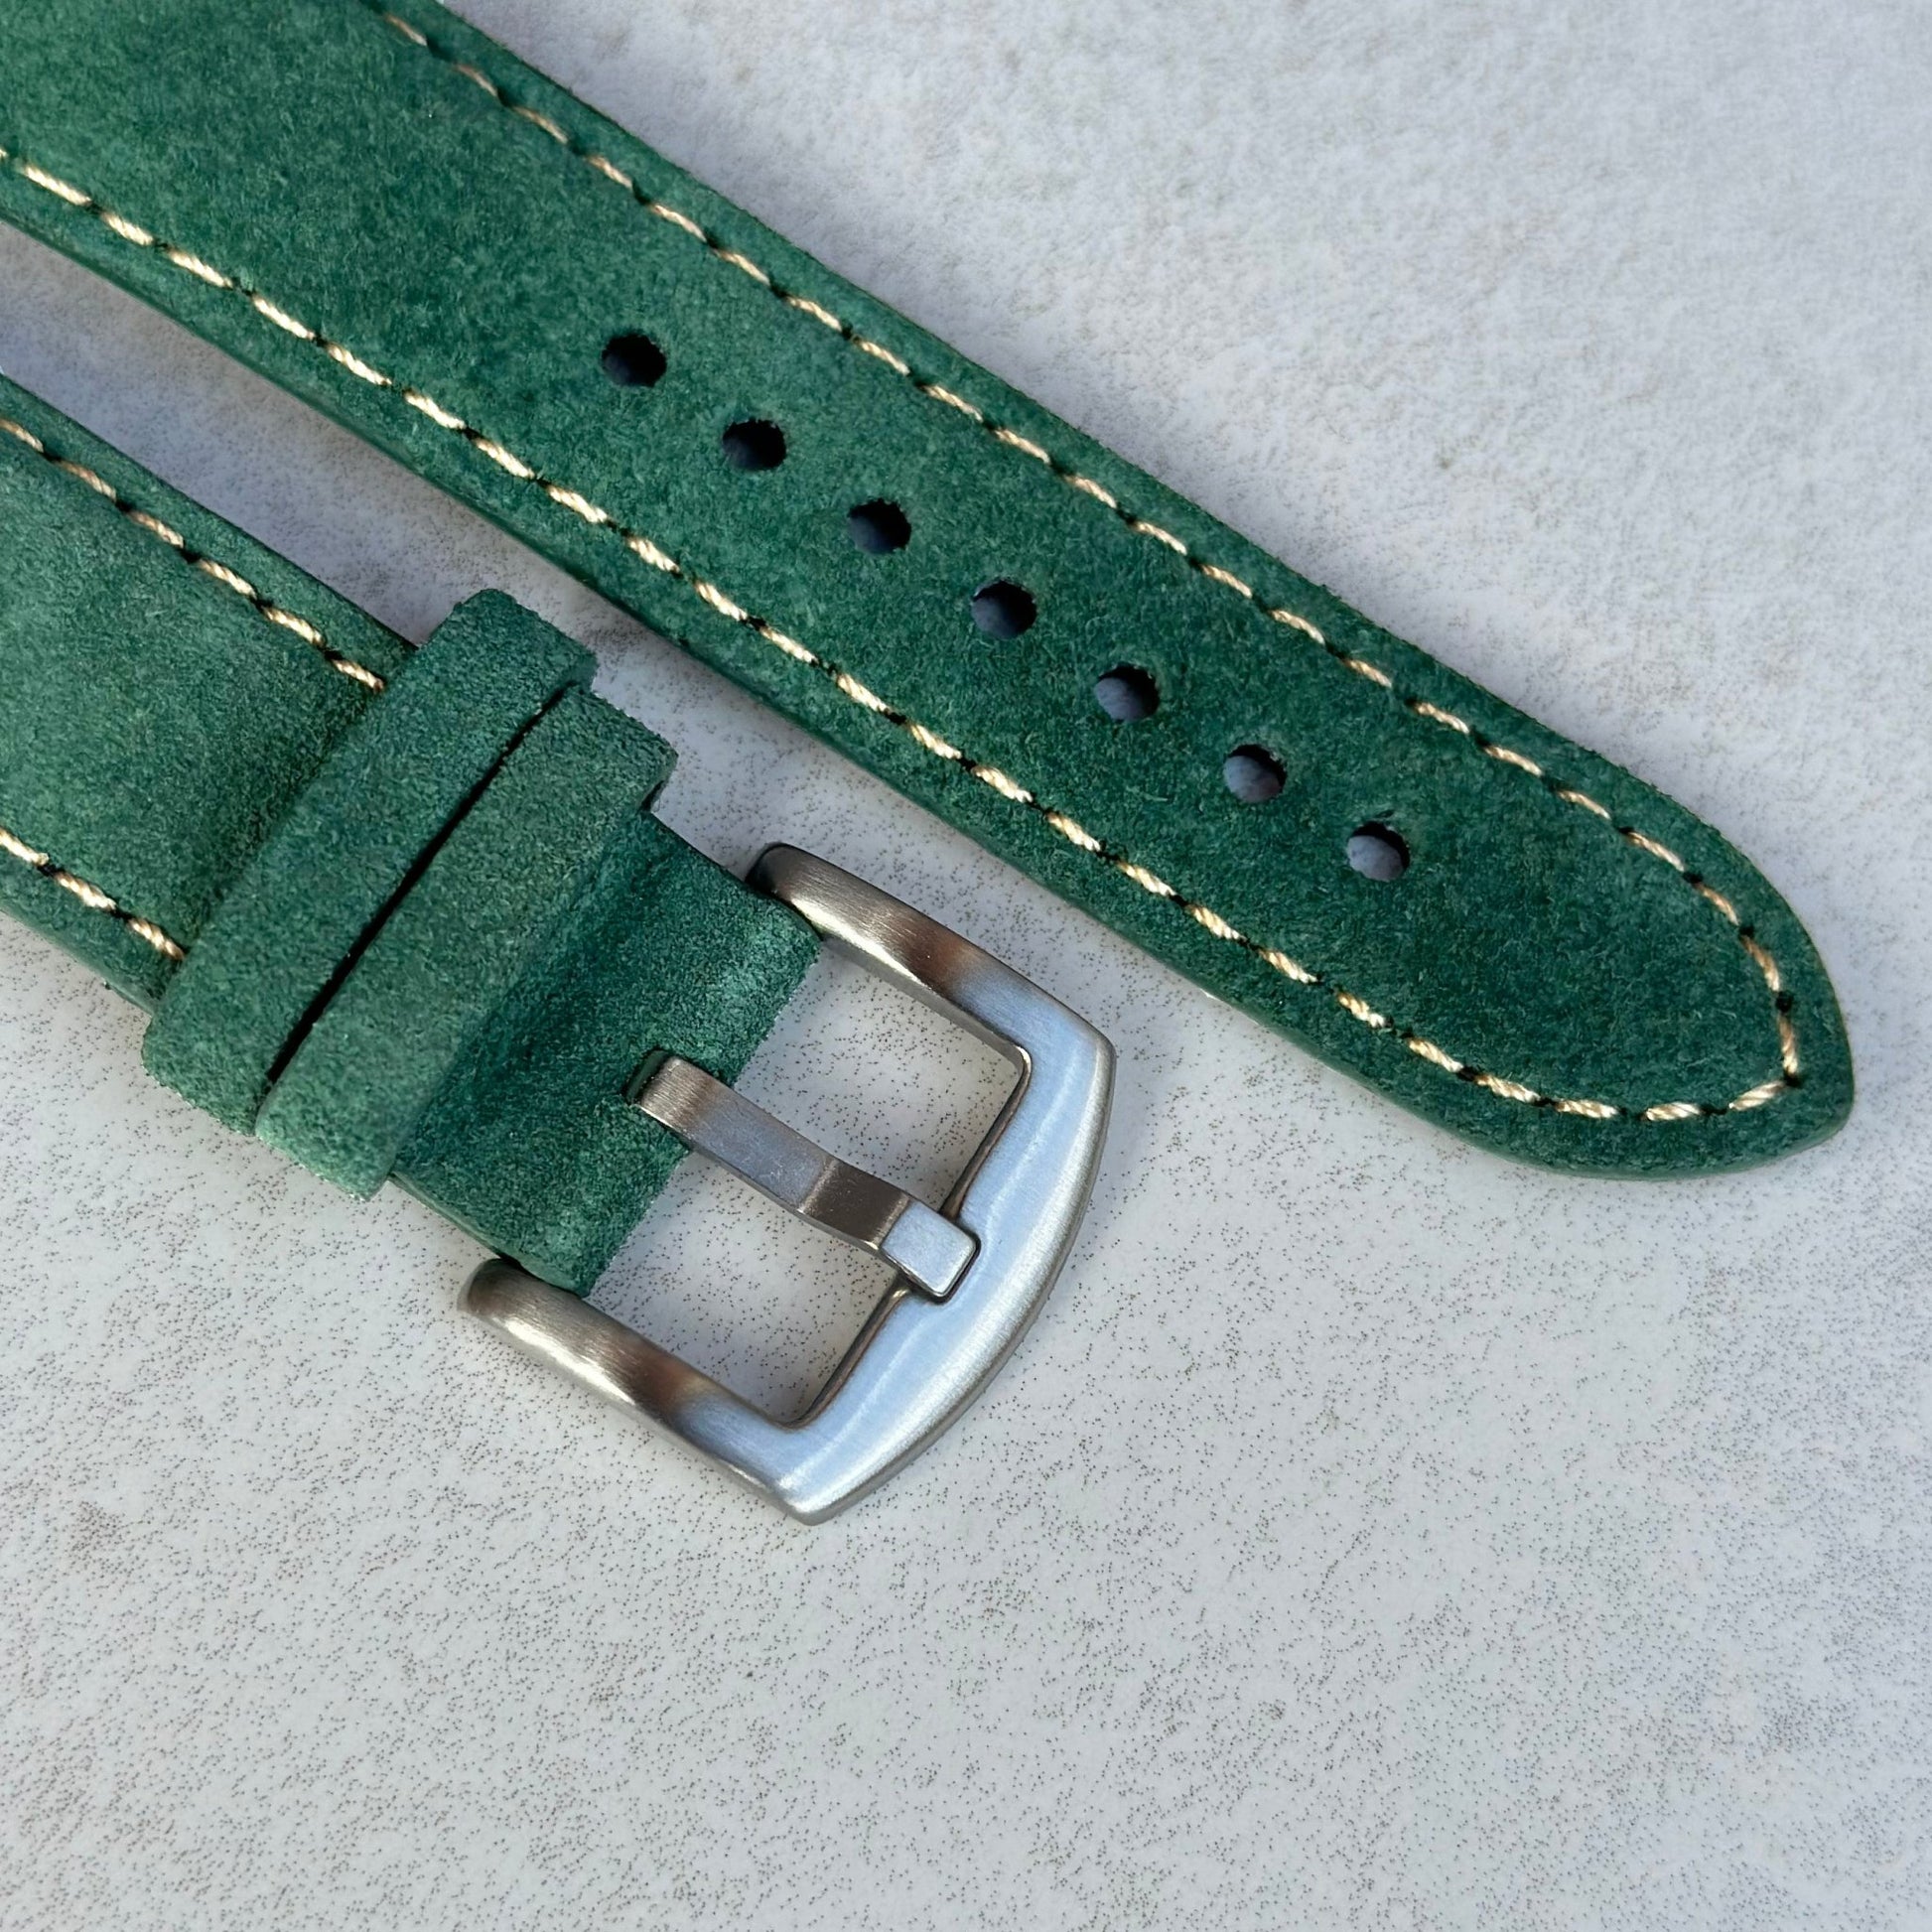 Brushed 316L stainless steel buckle on the Paris hunter green suede Apple Watch strap. Watch And Strap.